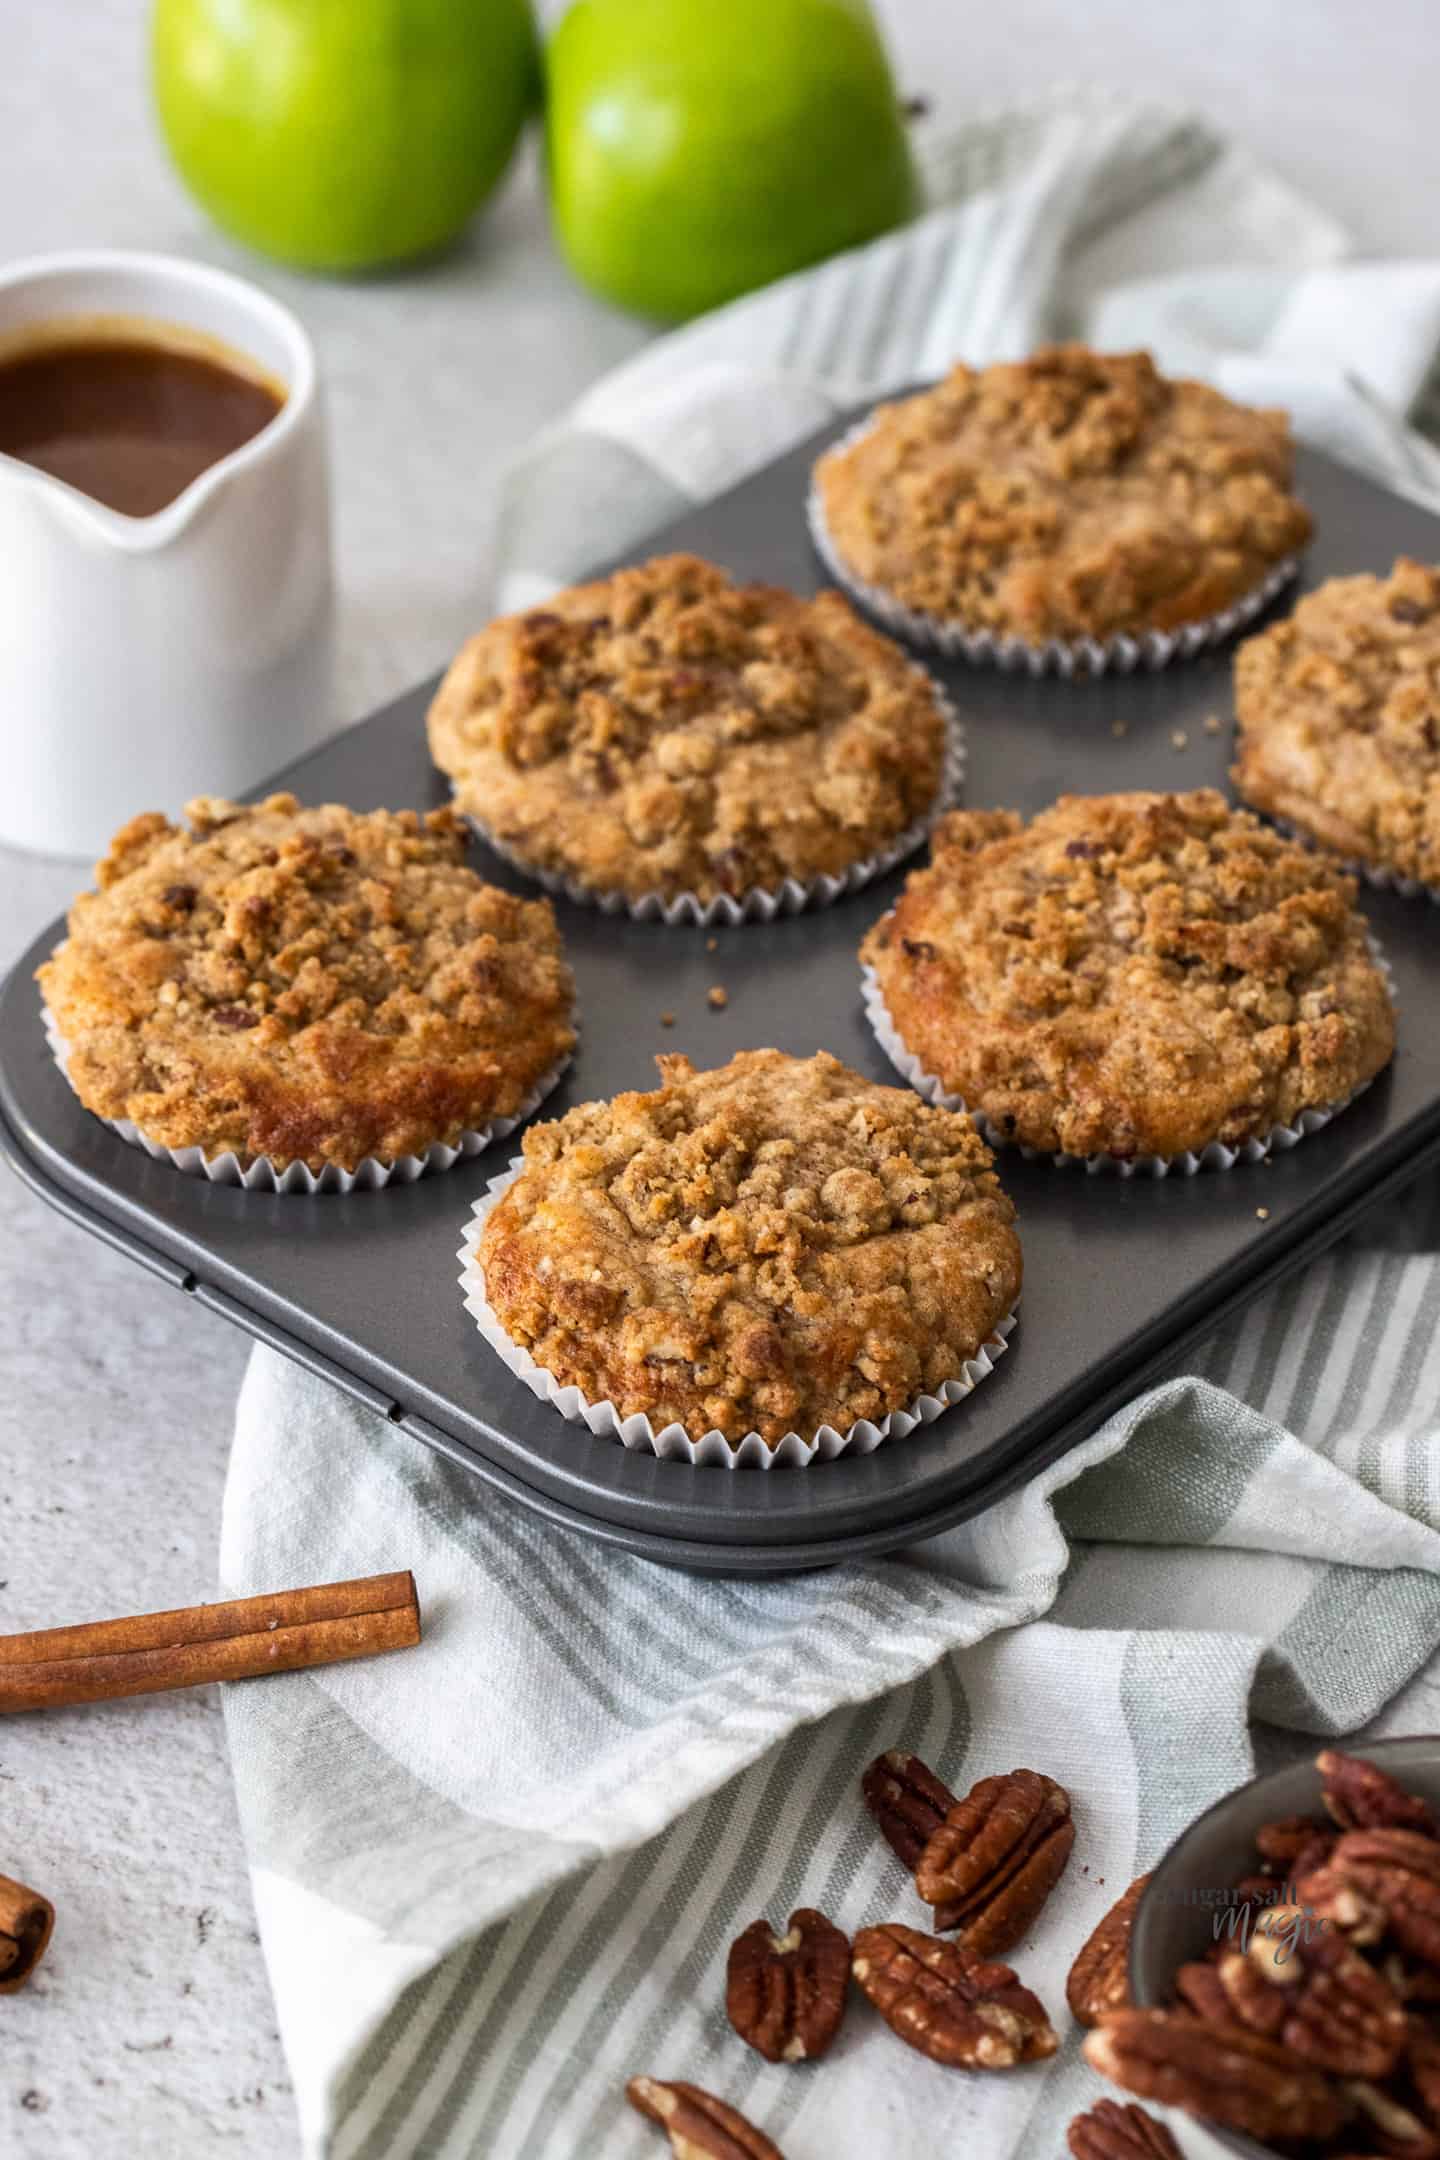 A muffin tin with 6 crumble-topped muffins in it.